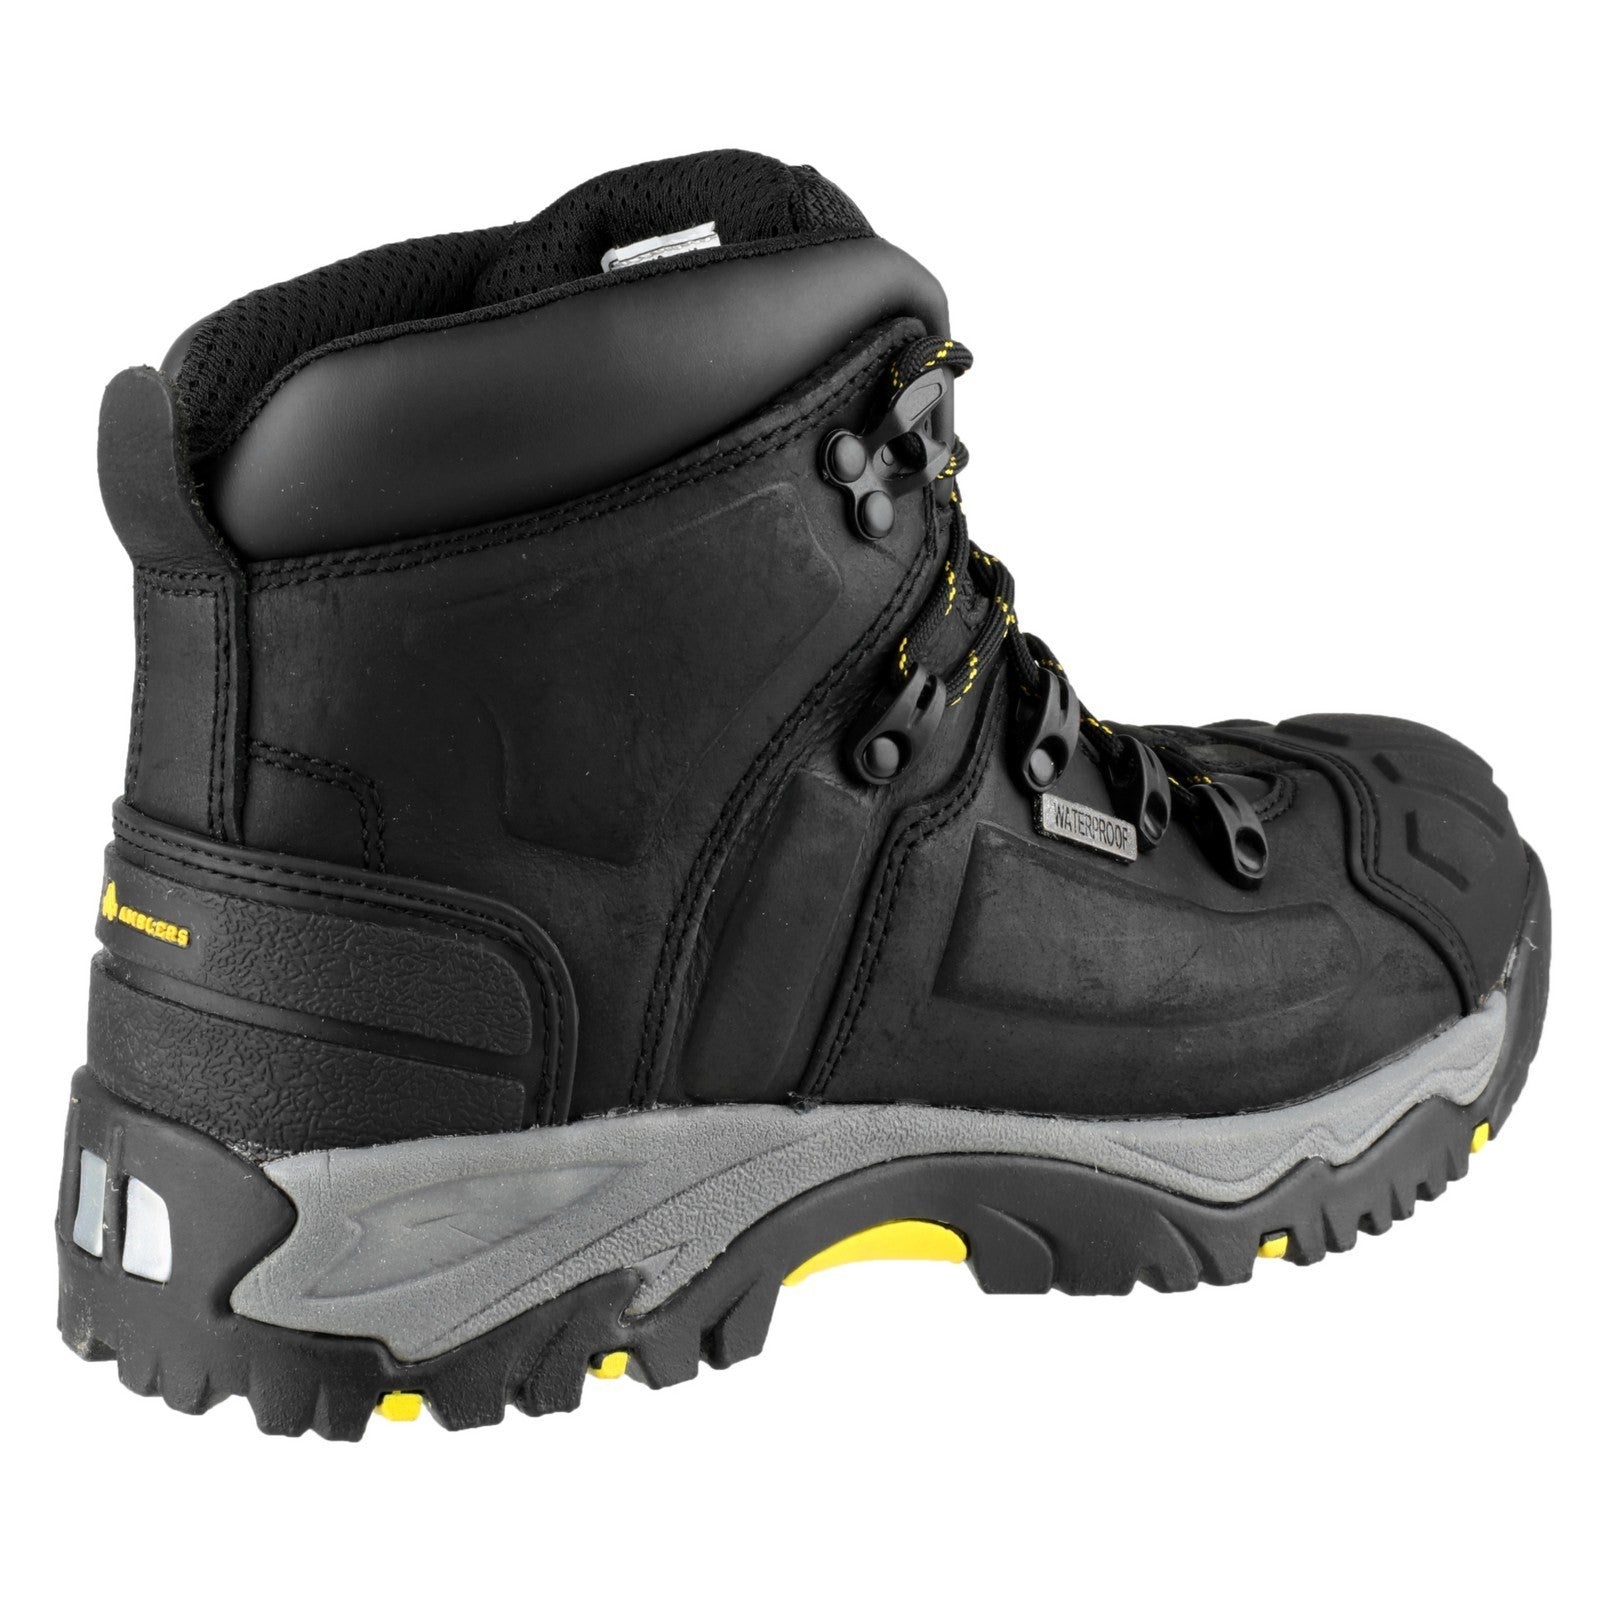 Amblers AS803 Waterproof Wide Fit Safety Boot